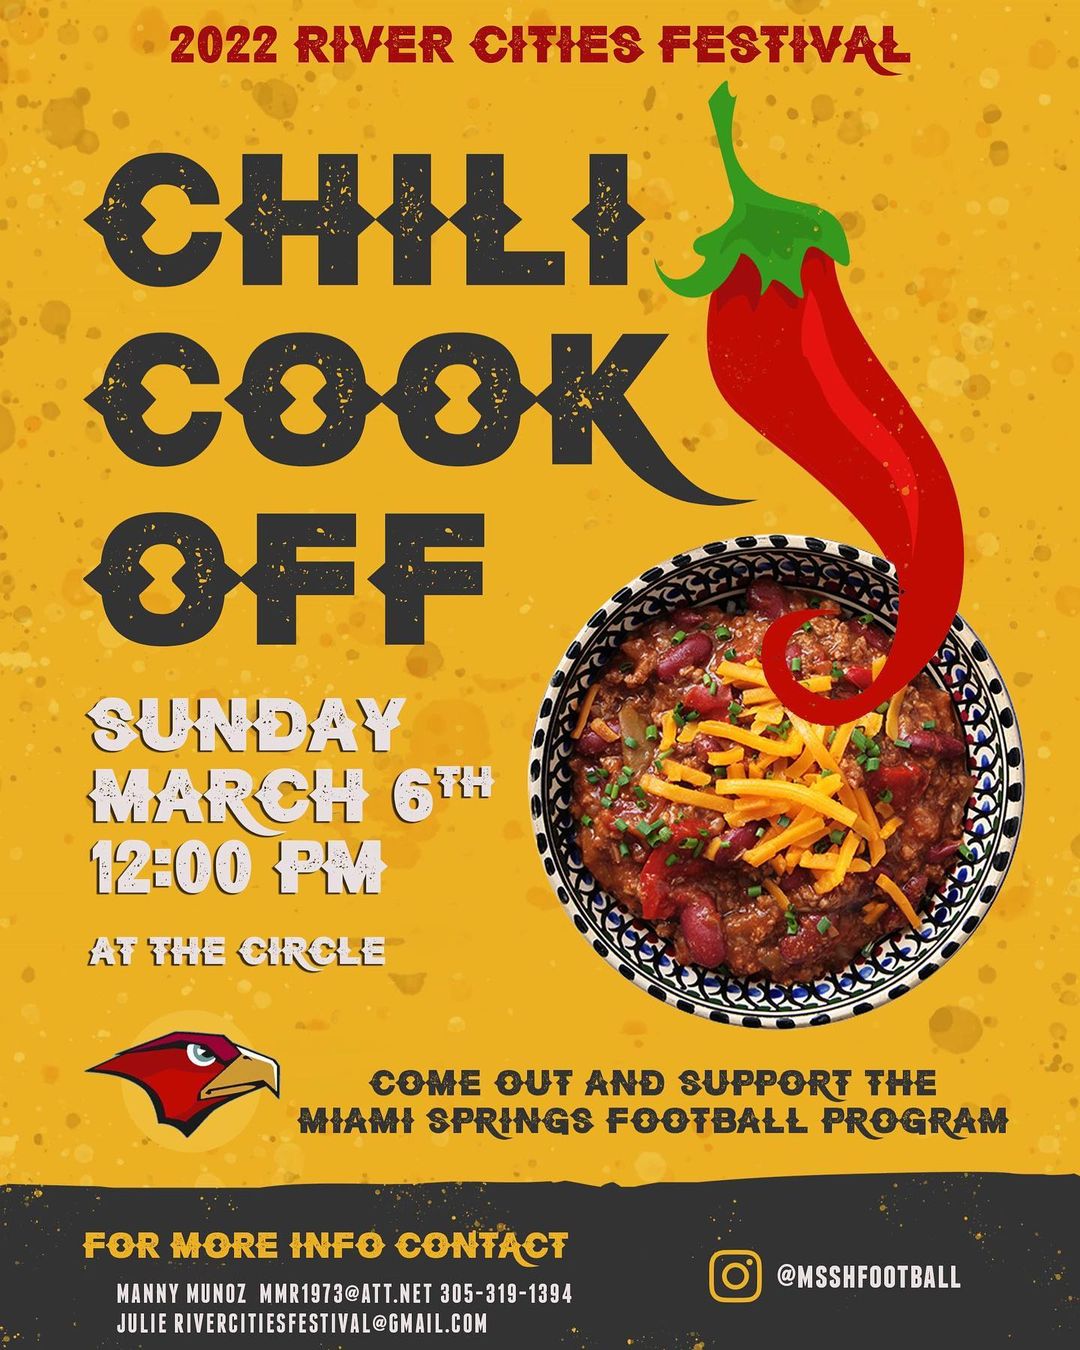 Chili Cook Off at River Cities Festival